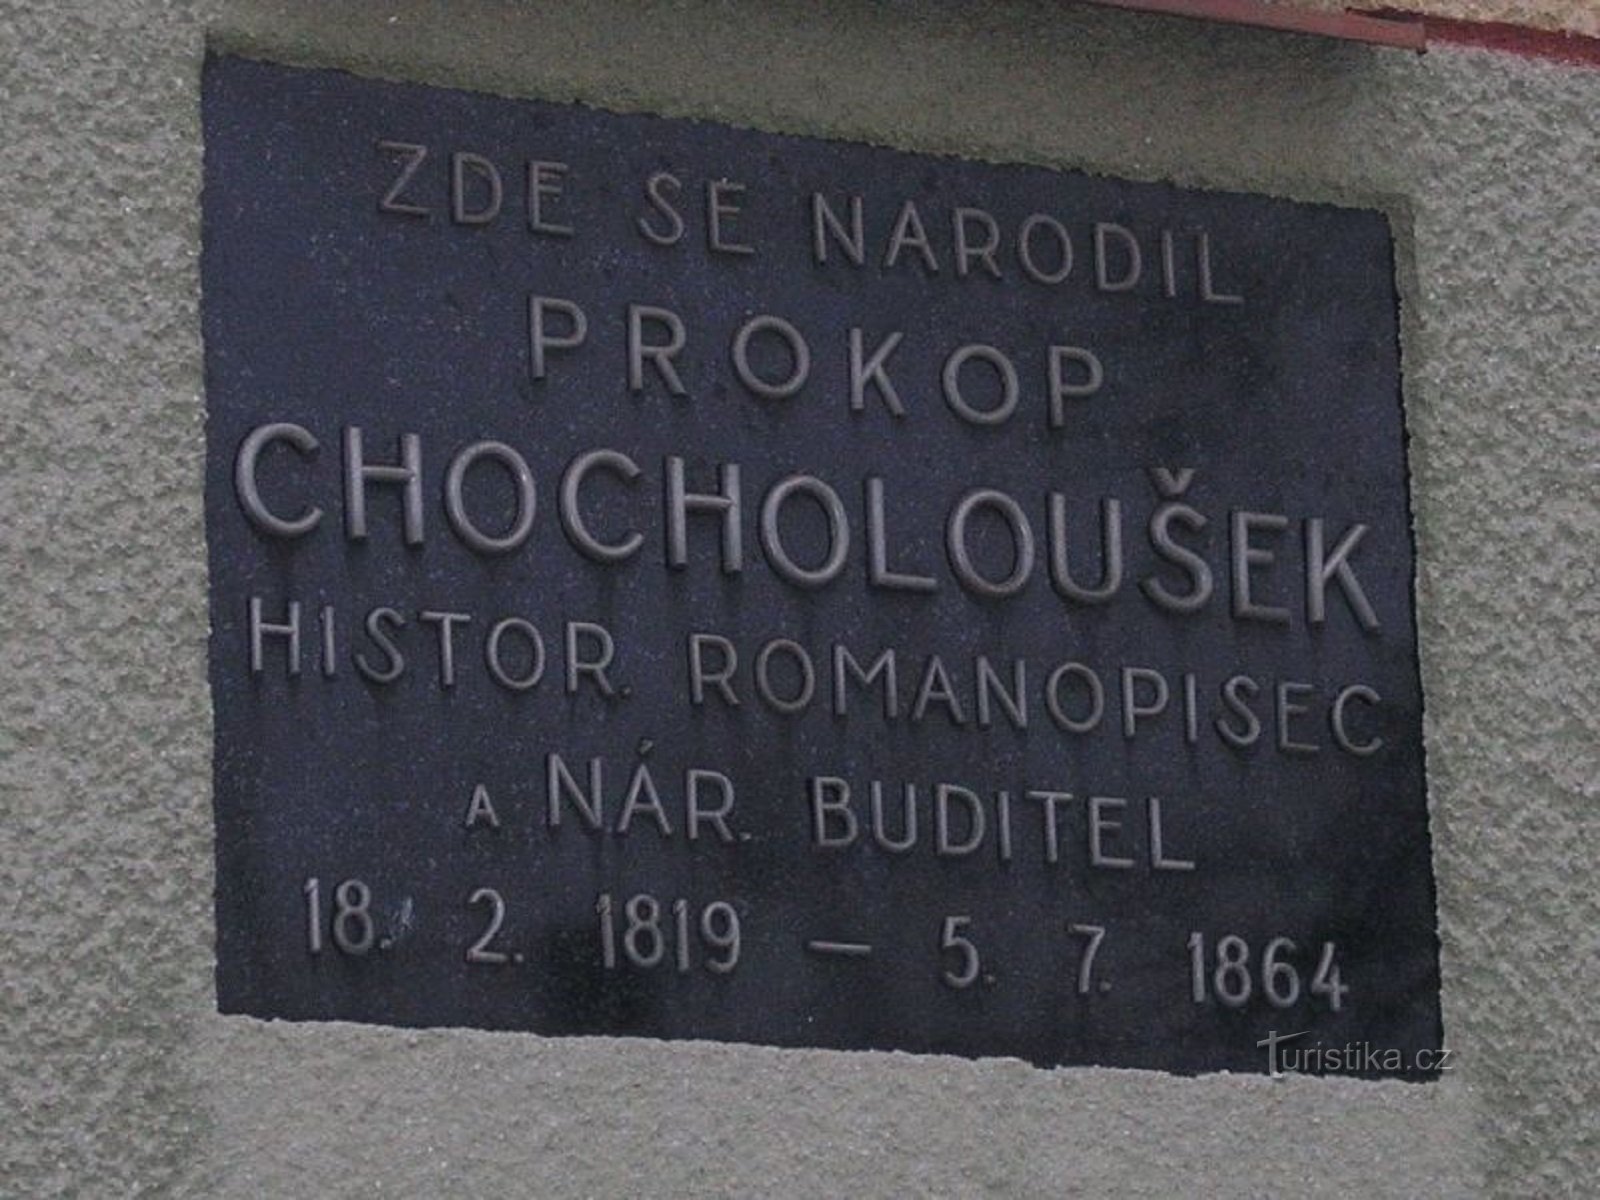 2. A commemorative plaque commemorating the writer at his birthplace at the present time.